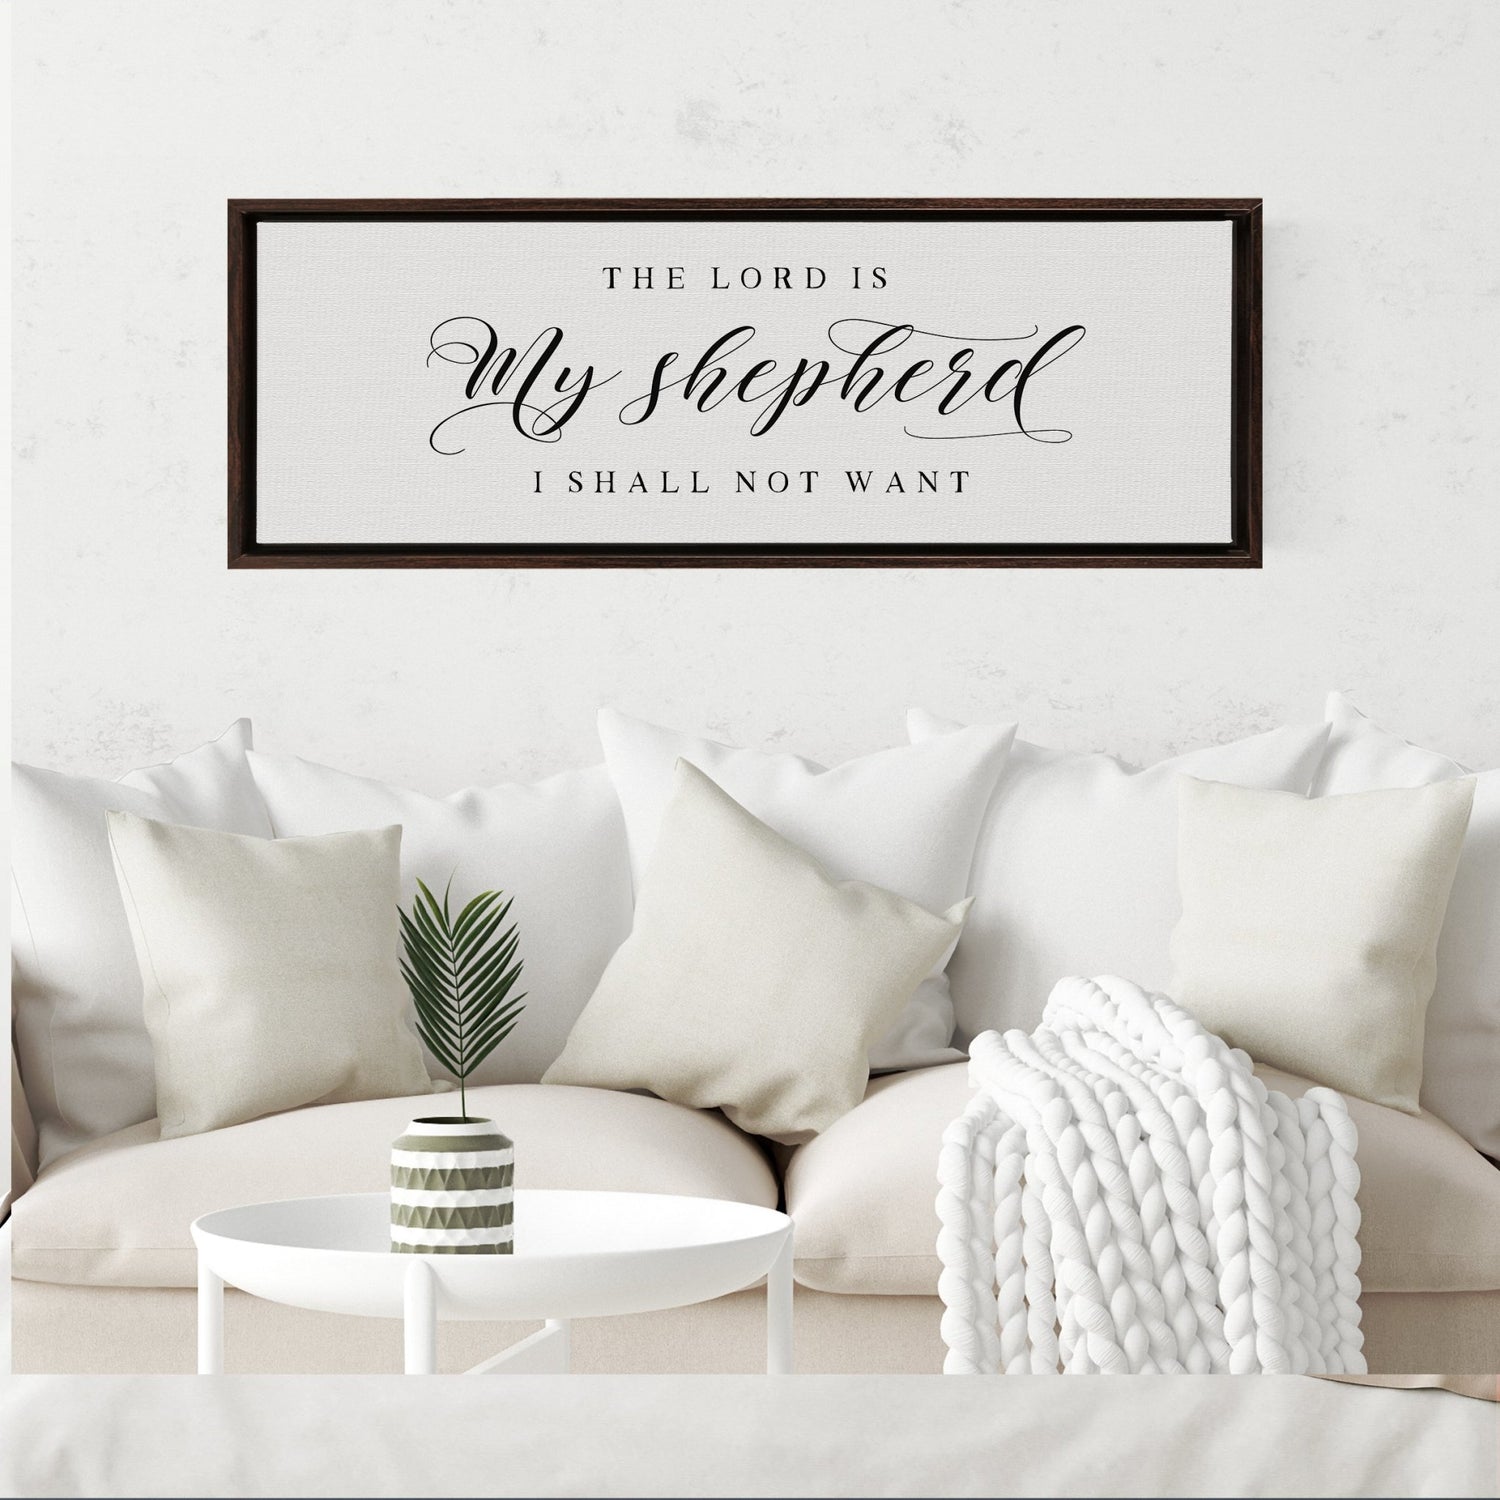 The Lord Is My Shepherd I Shall Not Want | Psalm 23:1 | Bible Verse Wall Art - Forever Written